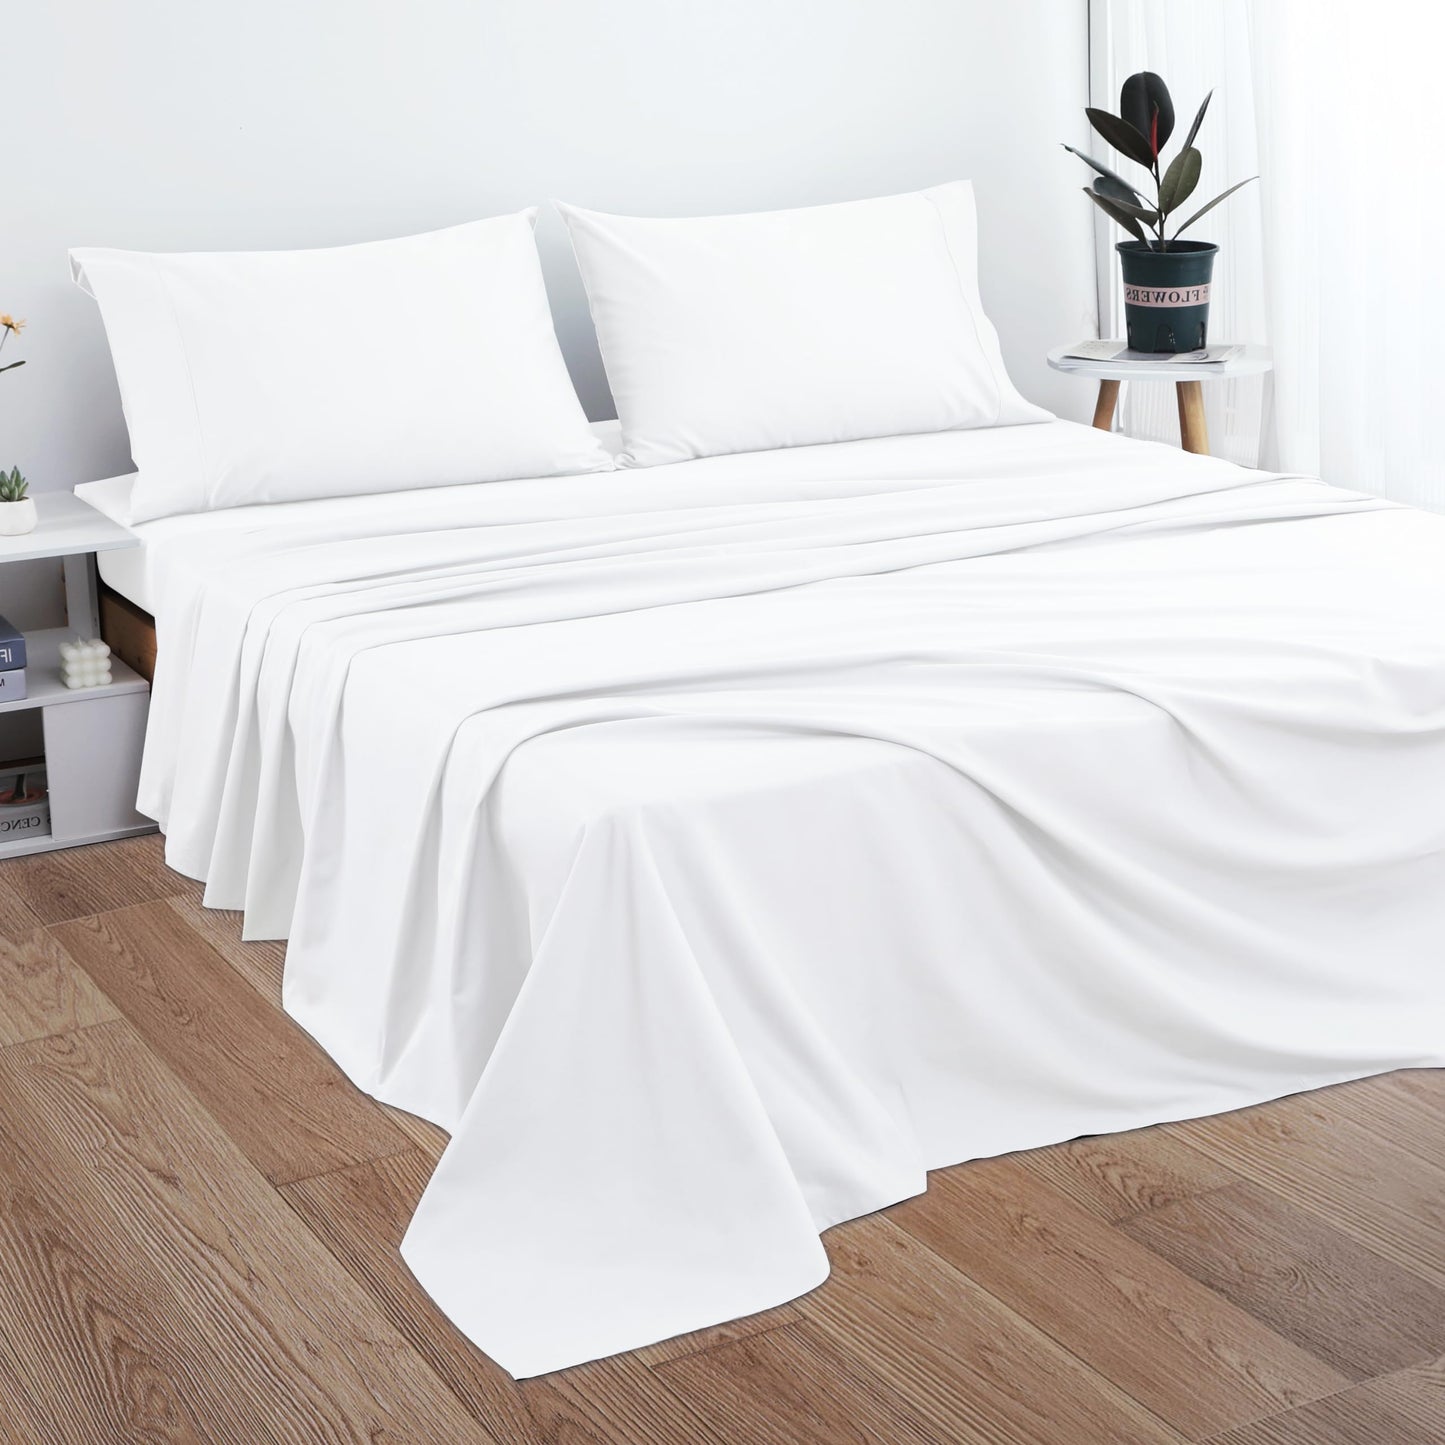 Cotton Full Flat Sheet Only, 600 Thread Count 100% Egyptian Cotton Top Sheet 1Pcs, Cool & Breathable Flat Bed Sheets Wrinkle, Fade, Stain Resistant (White Full)